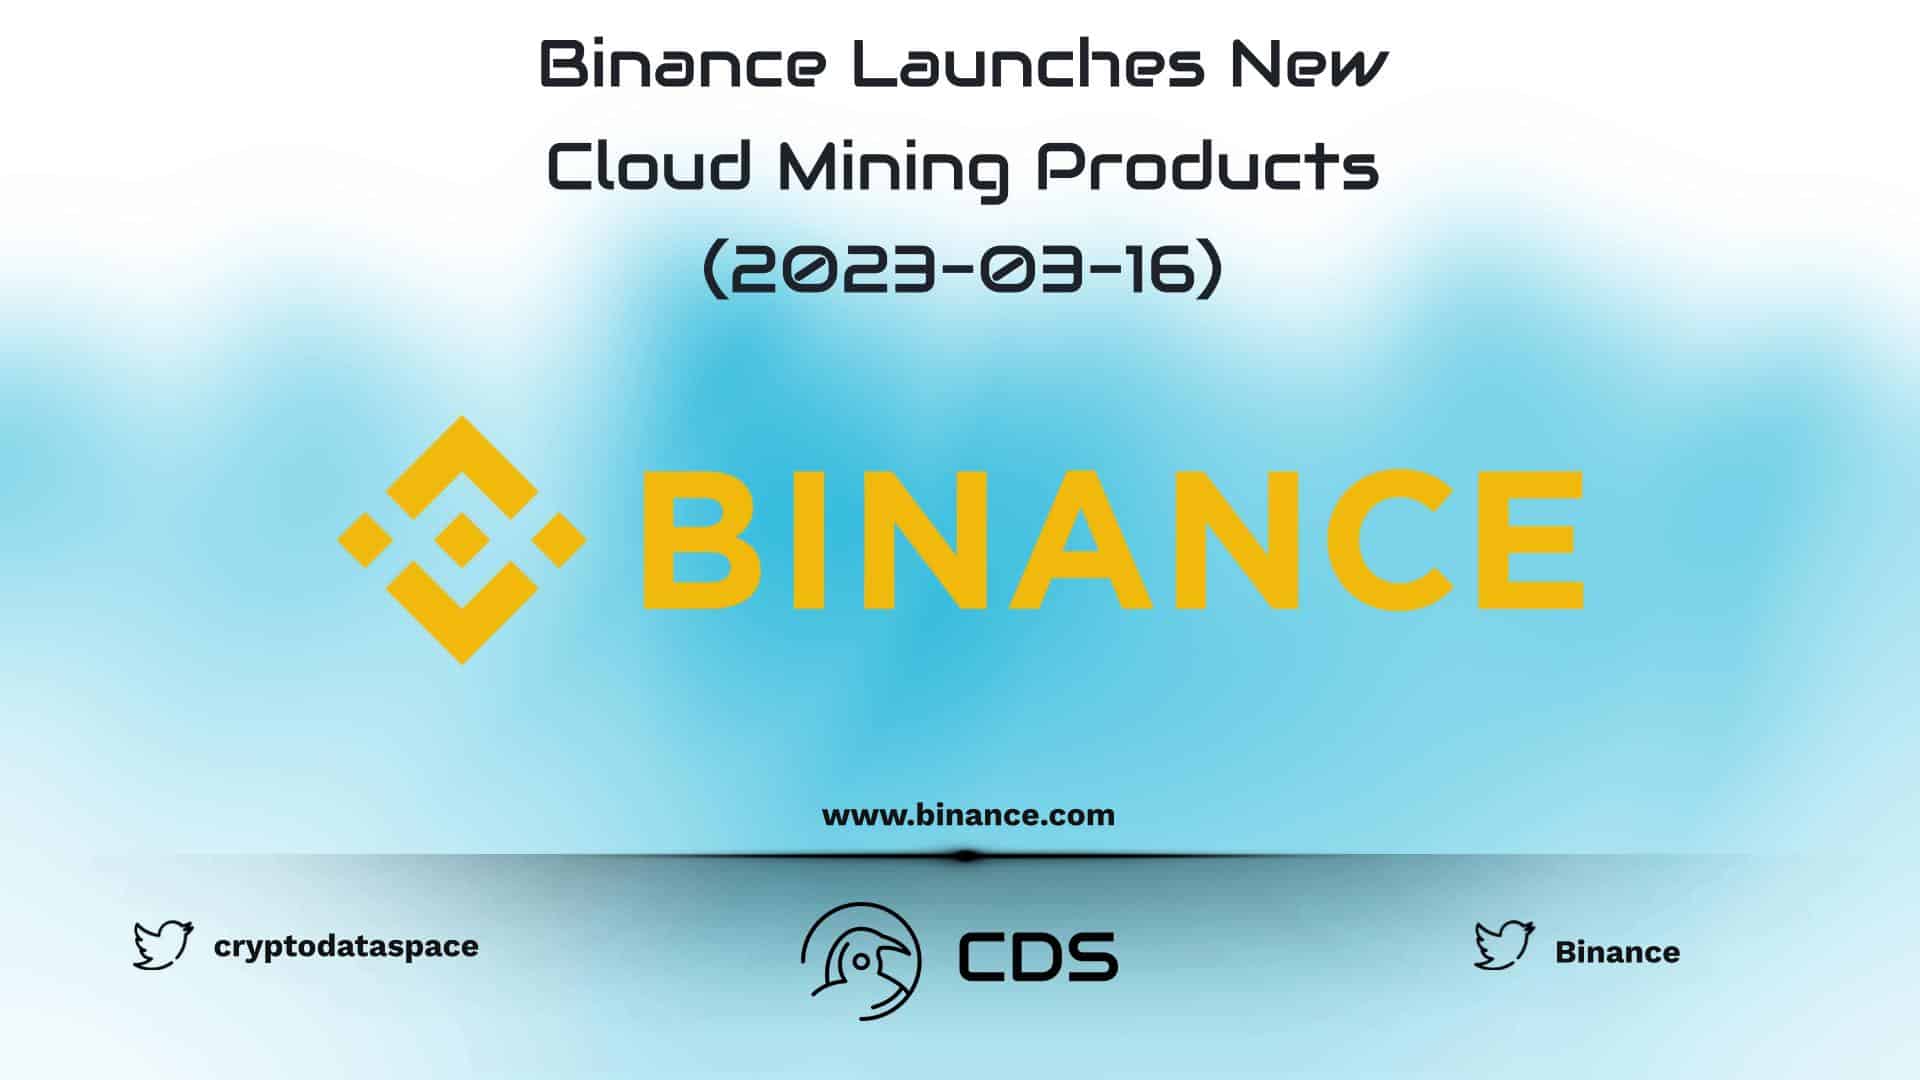 Binance Launches New Cloud Mining Products (2023-03-16)